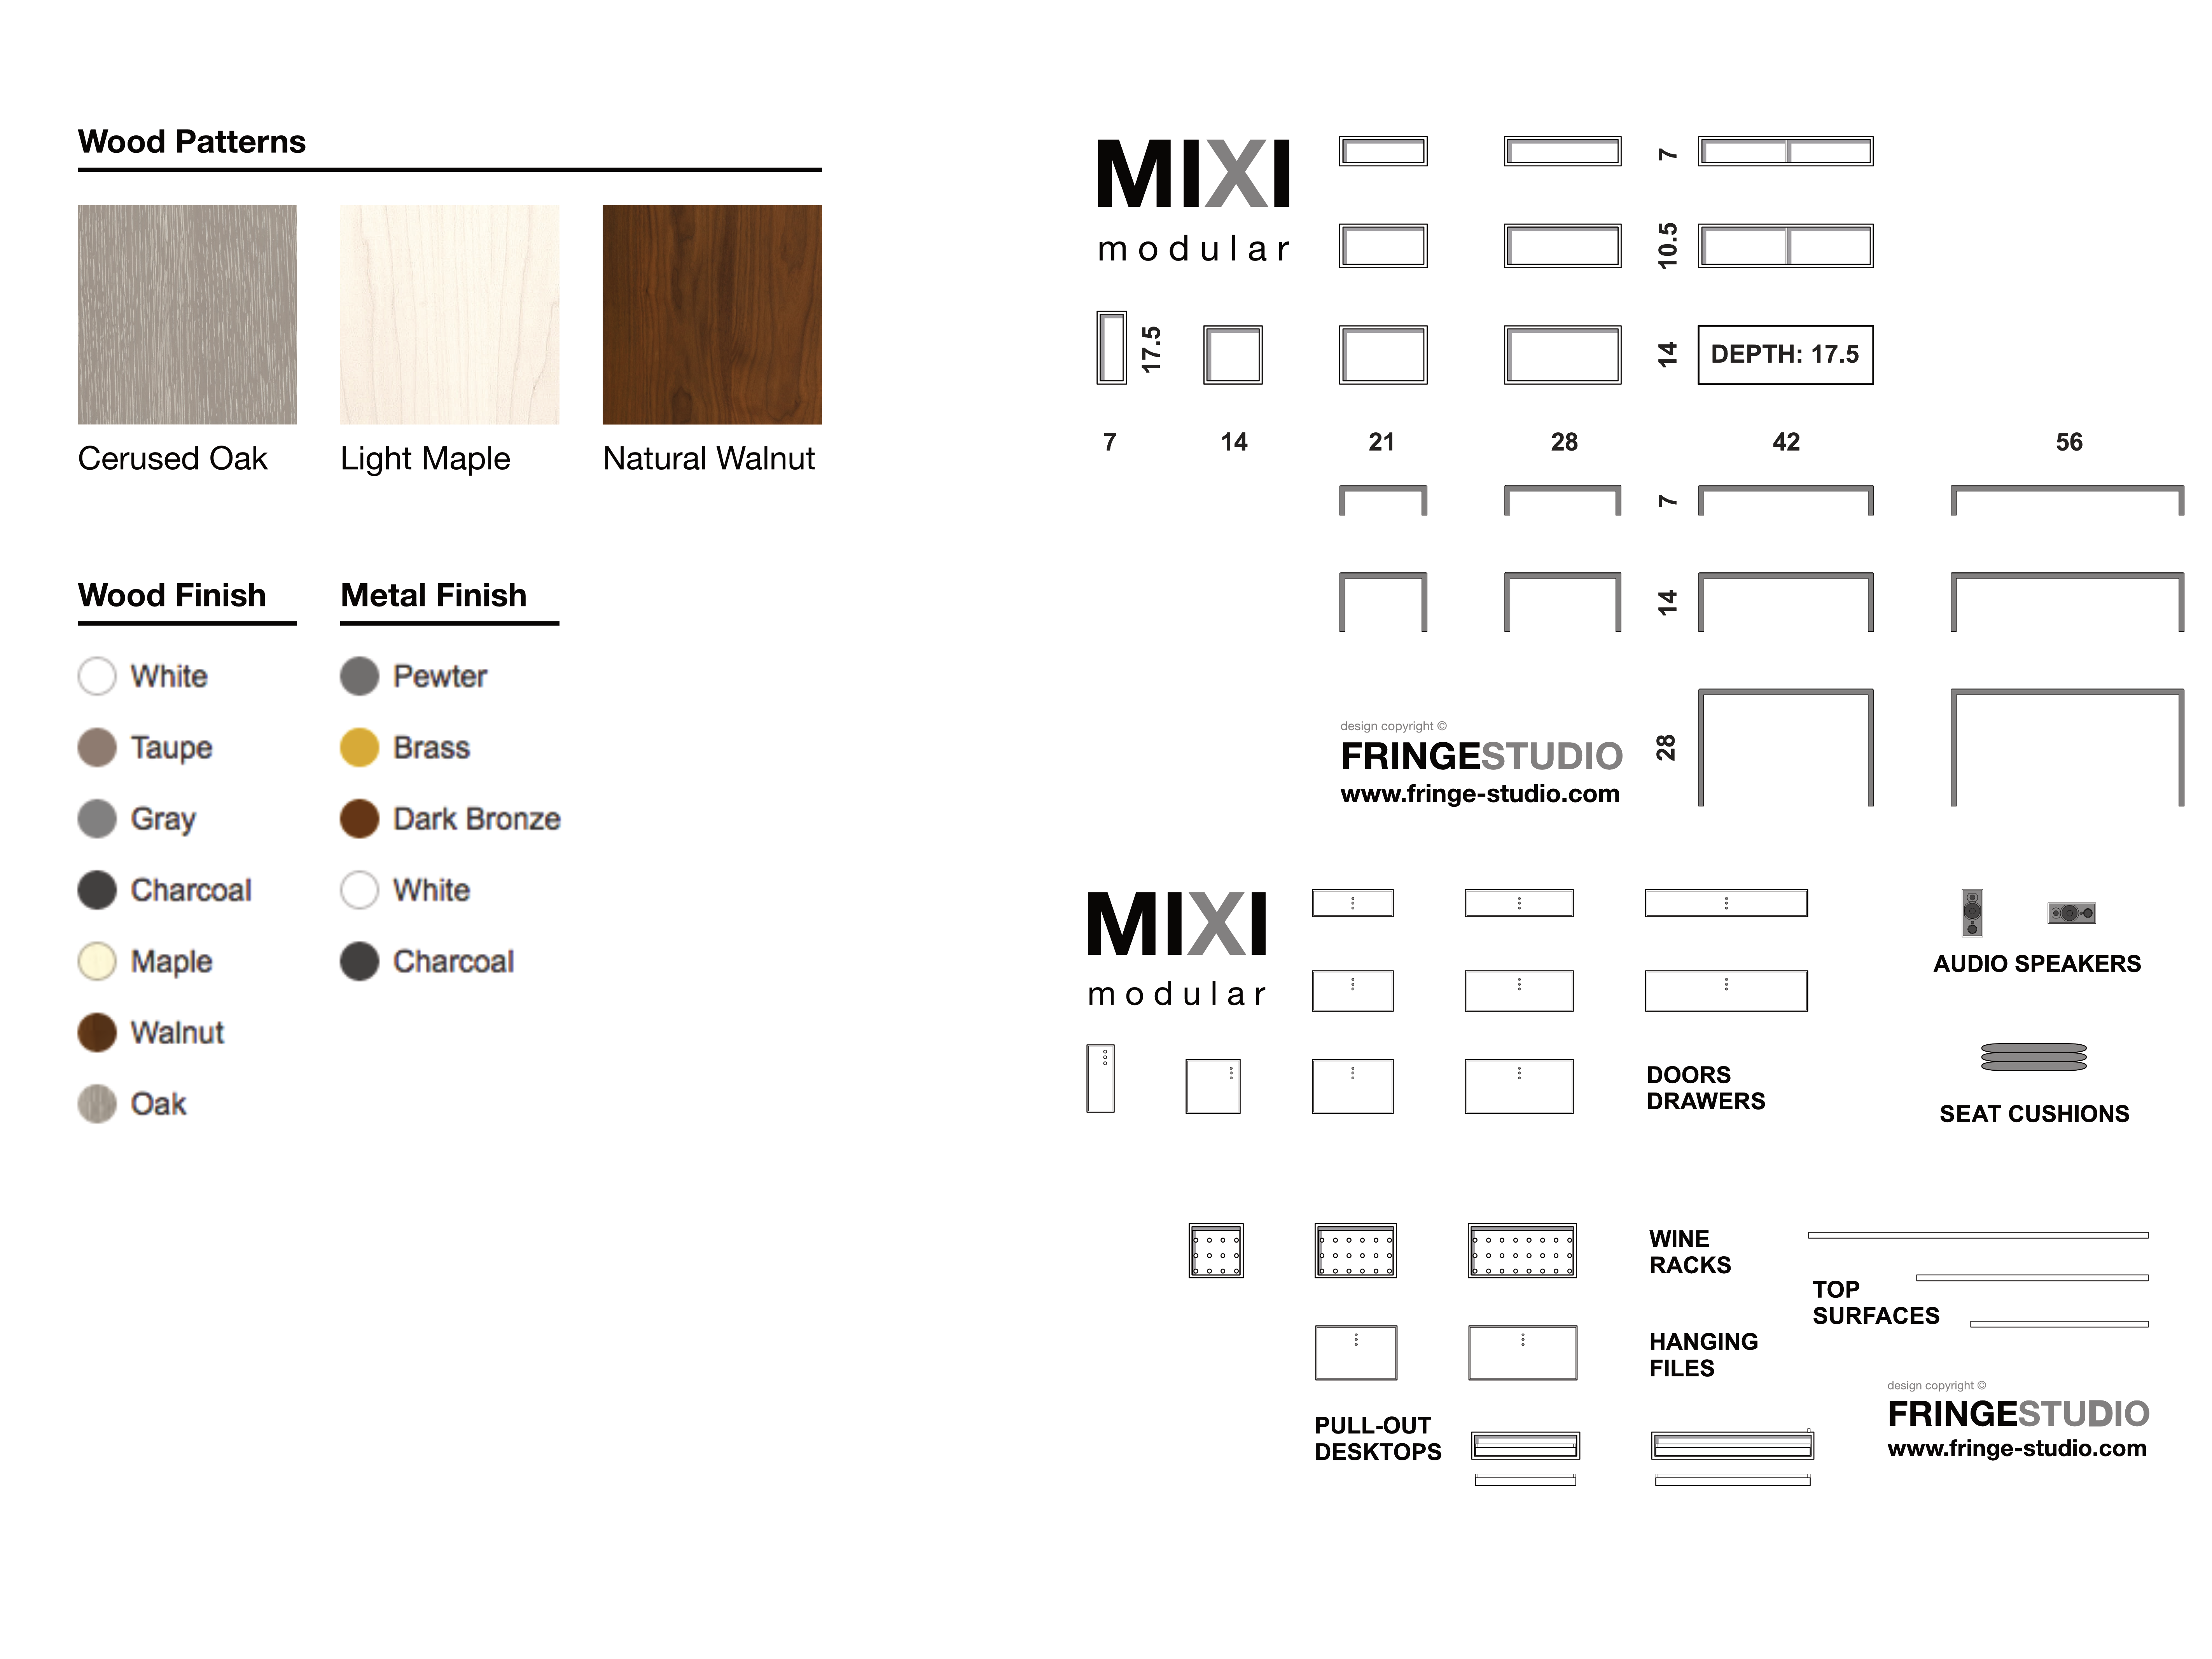 Diagram of colors, finishes and kit parts